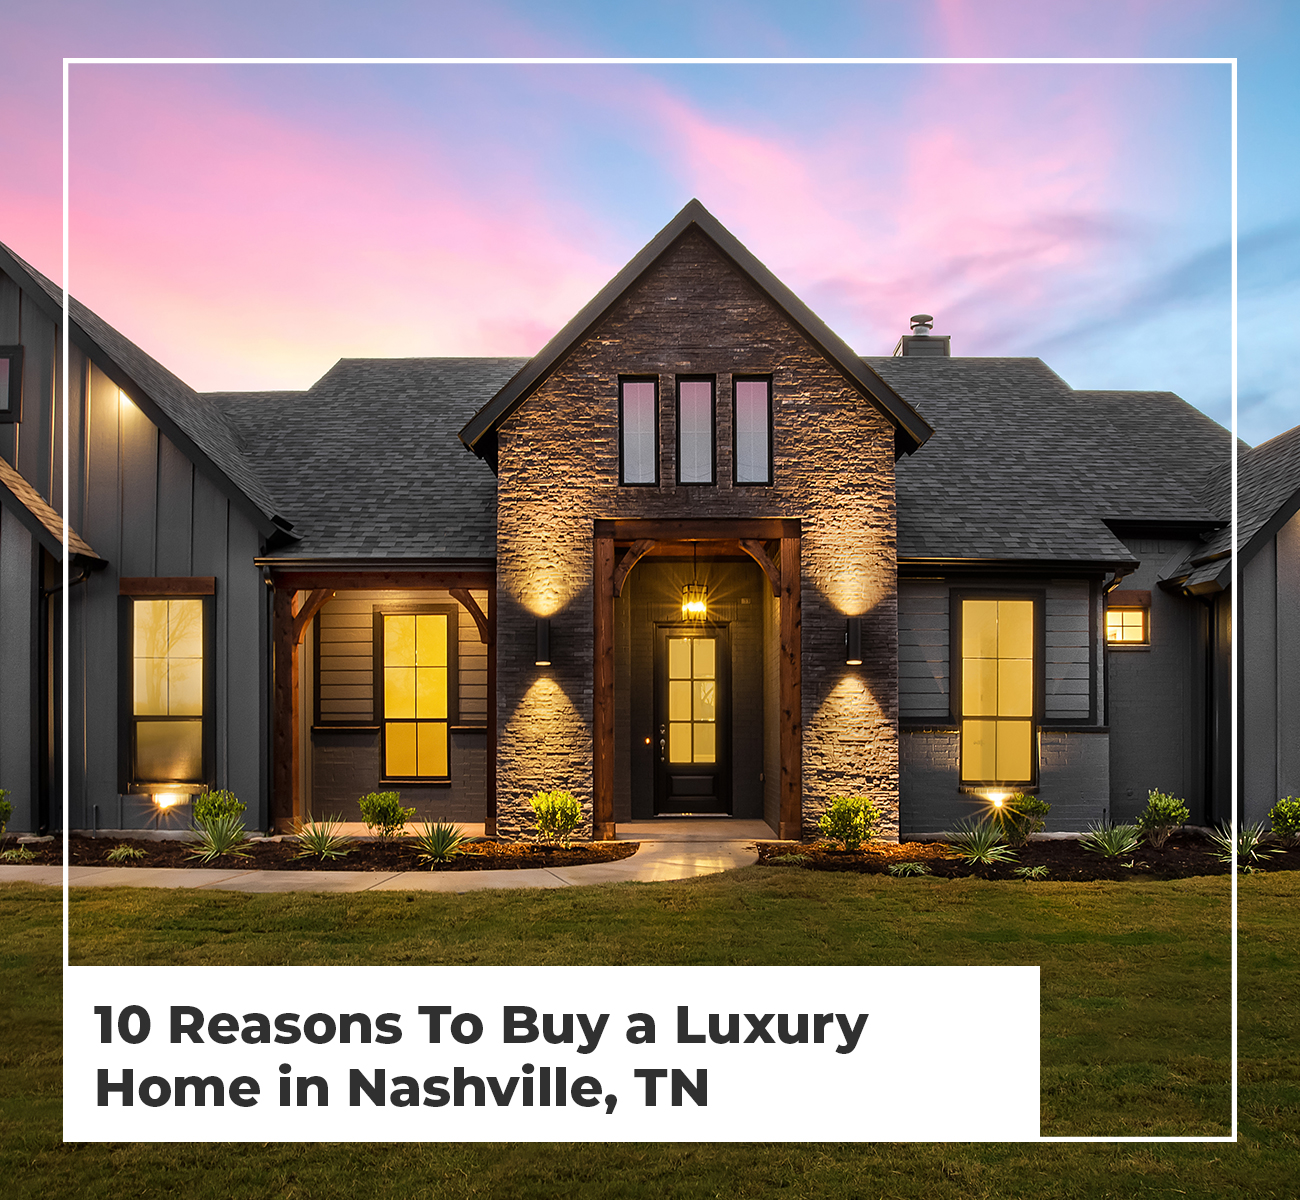 10 Reasons To Buy a Luxury Home in Nashville, TN